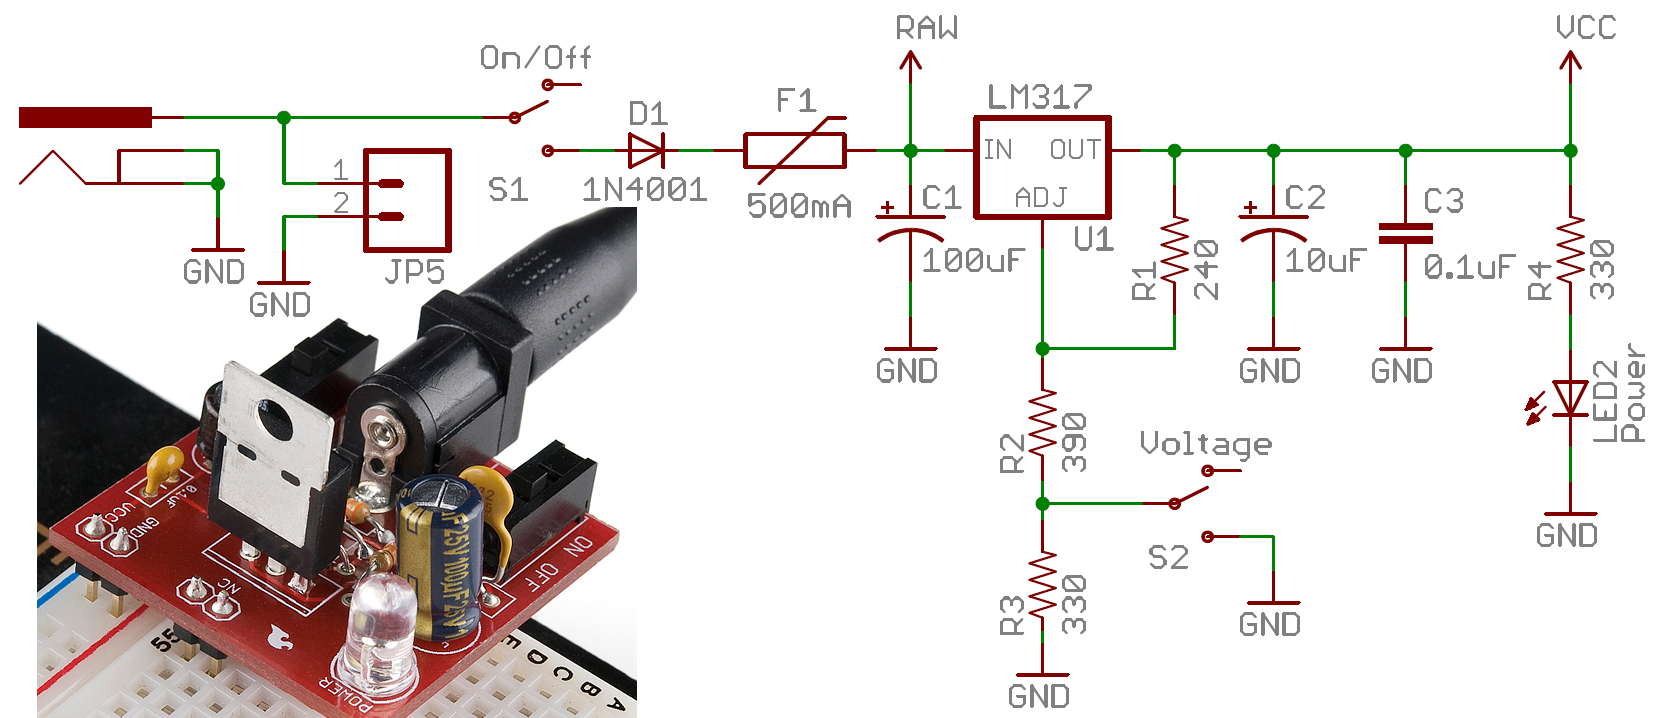 Switch Basics - Learn.sparkfun - On Off On Toggle Switch Wiring Diagram